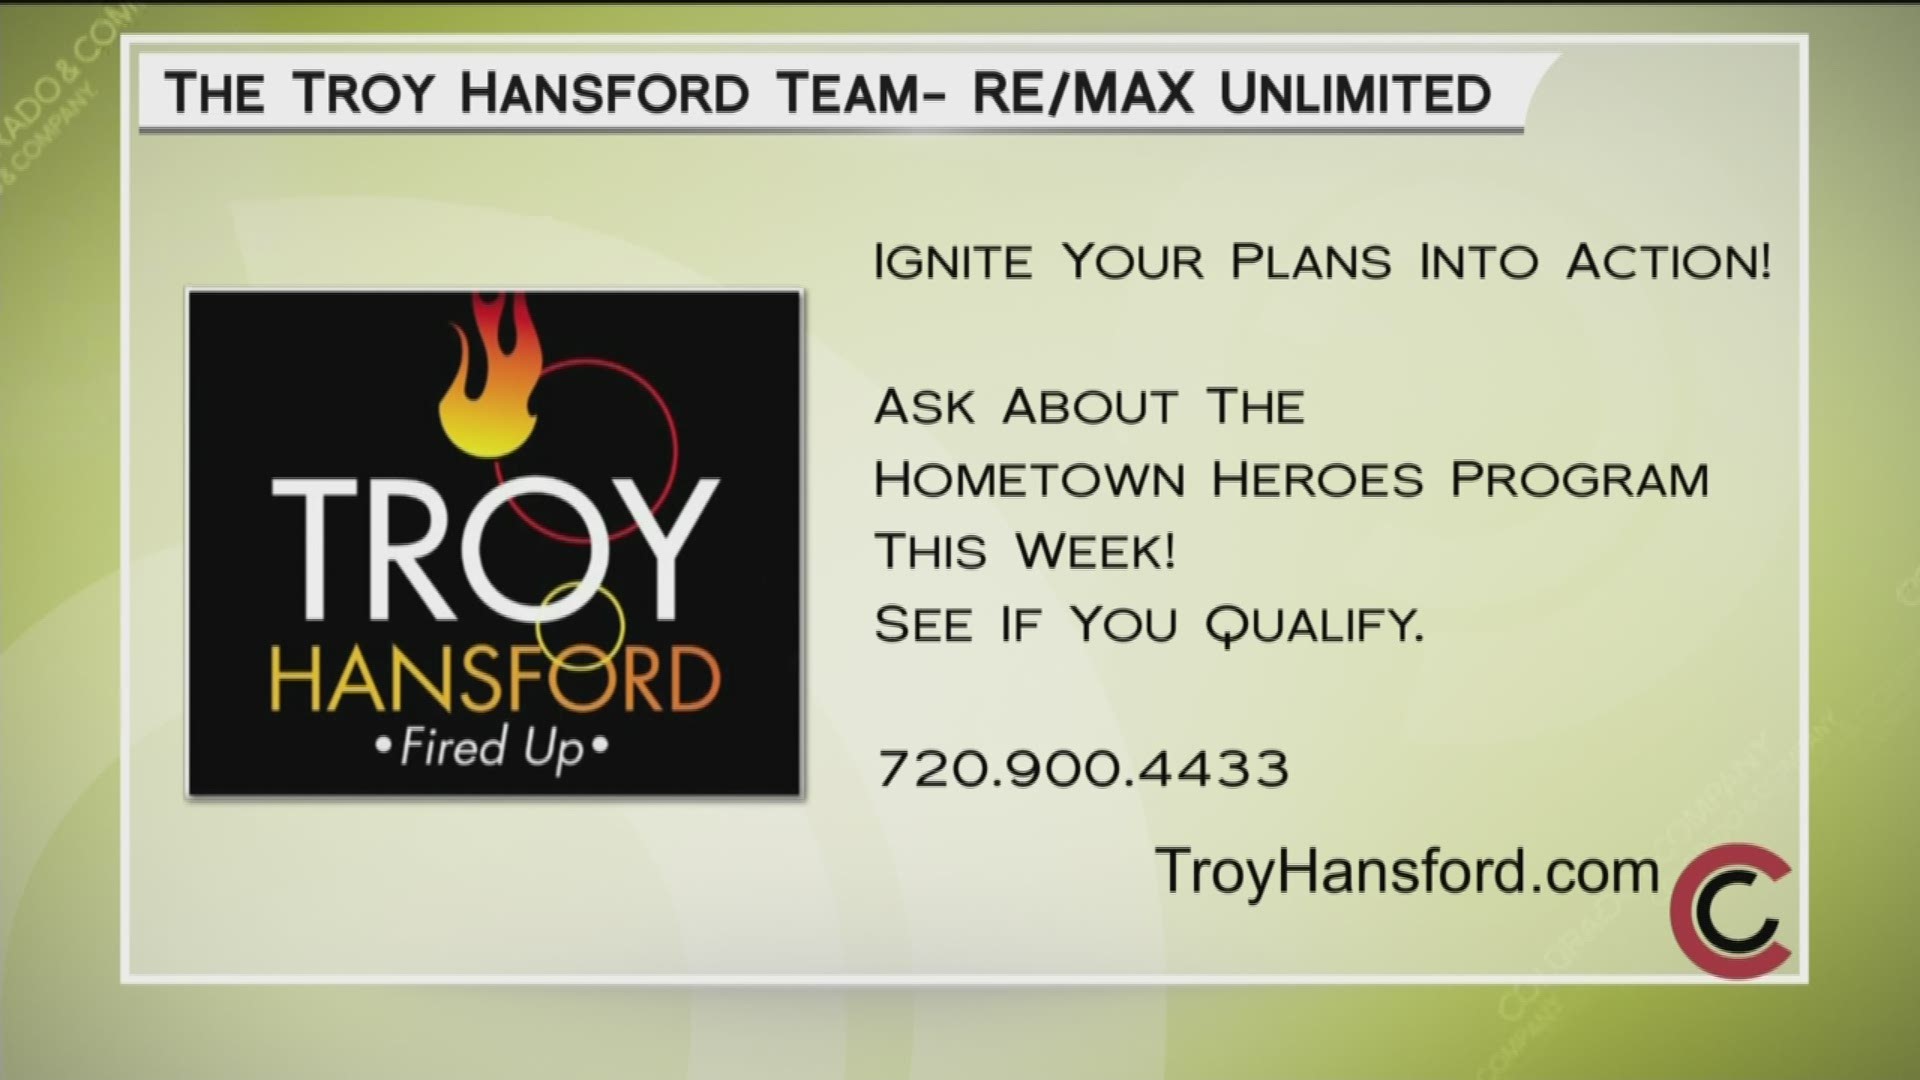 Check out Troy’s Hometown Heroes program and see if you qualify. Learn more at TroyHansford.com or call 720.900.4433.